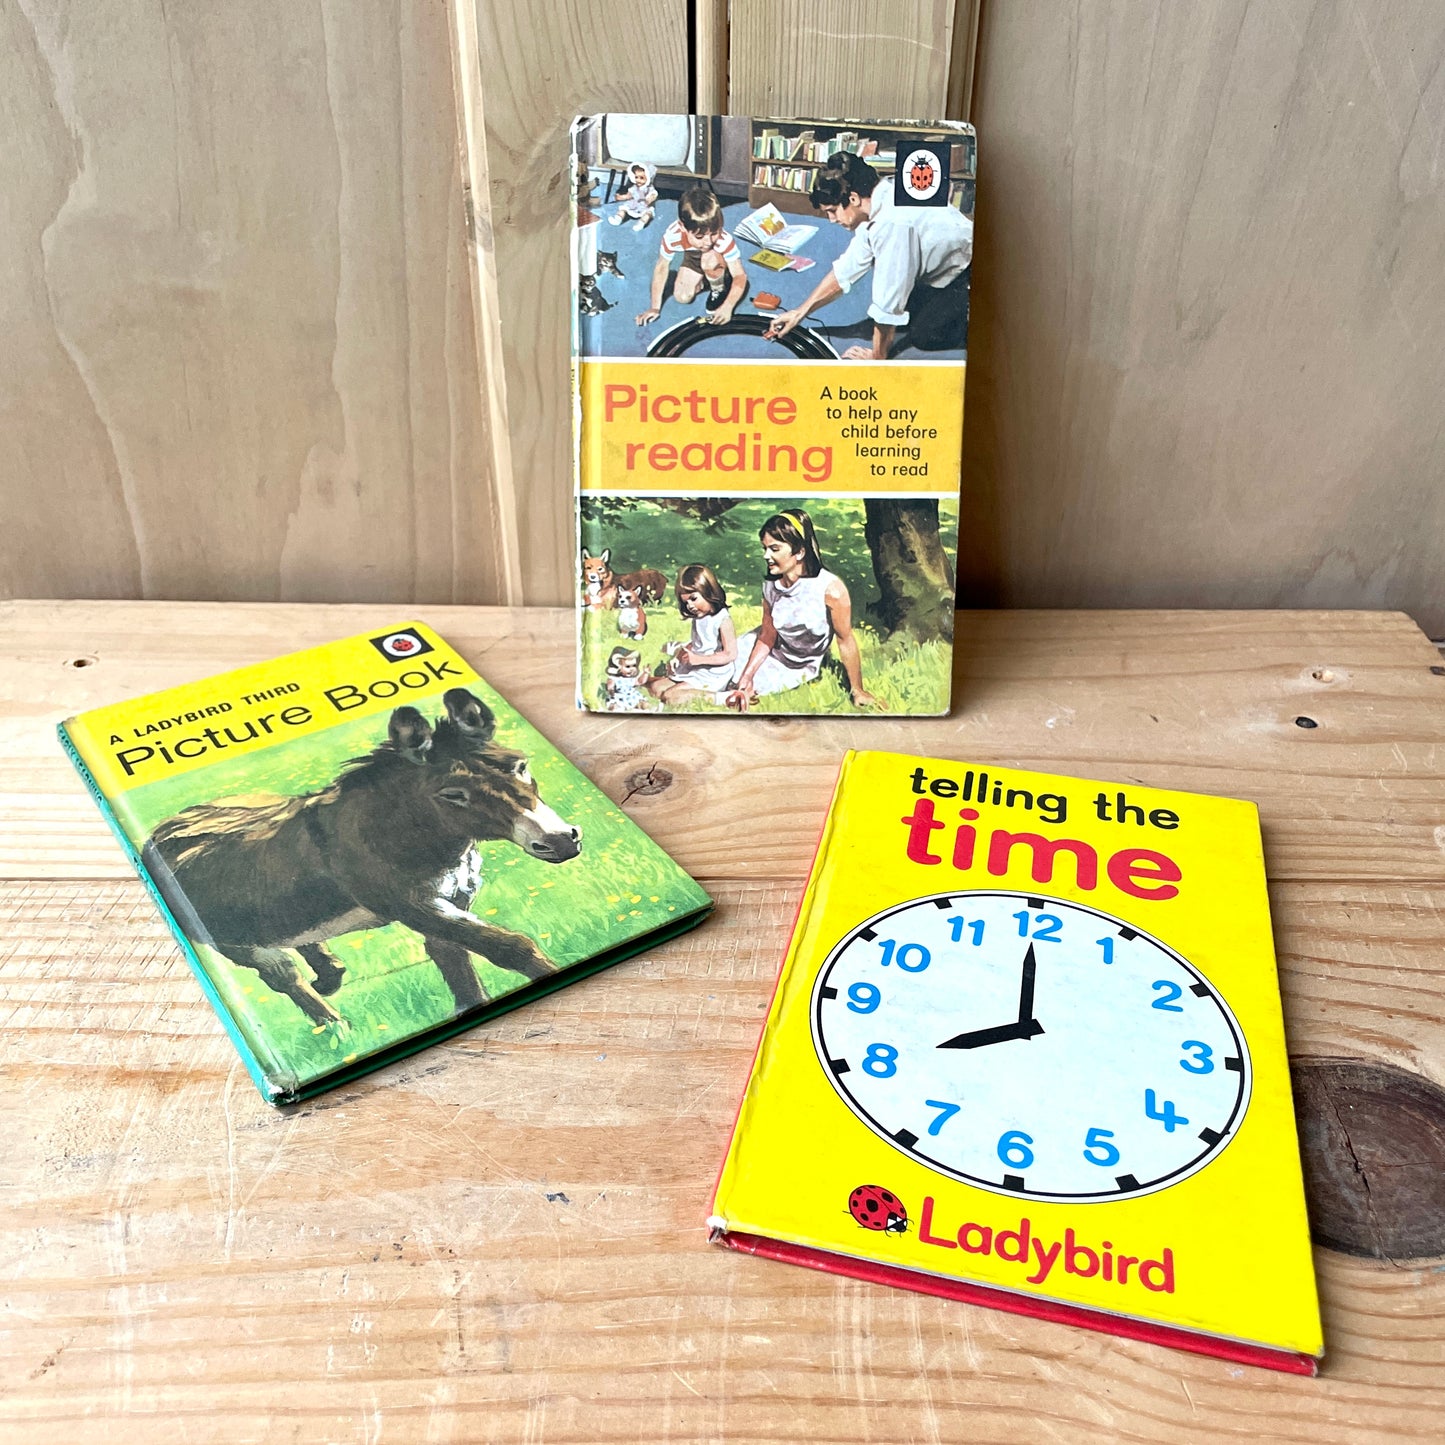 3 book set of Ladybird Picture books.